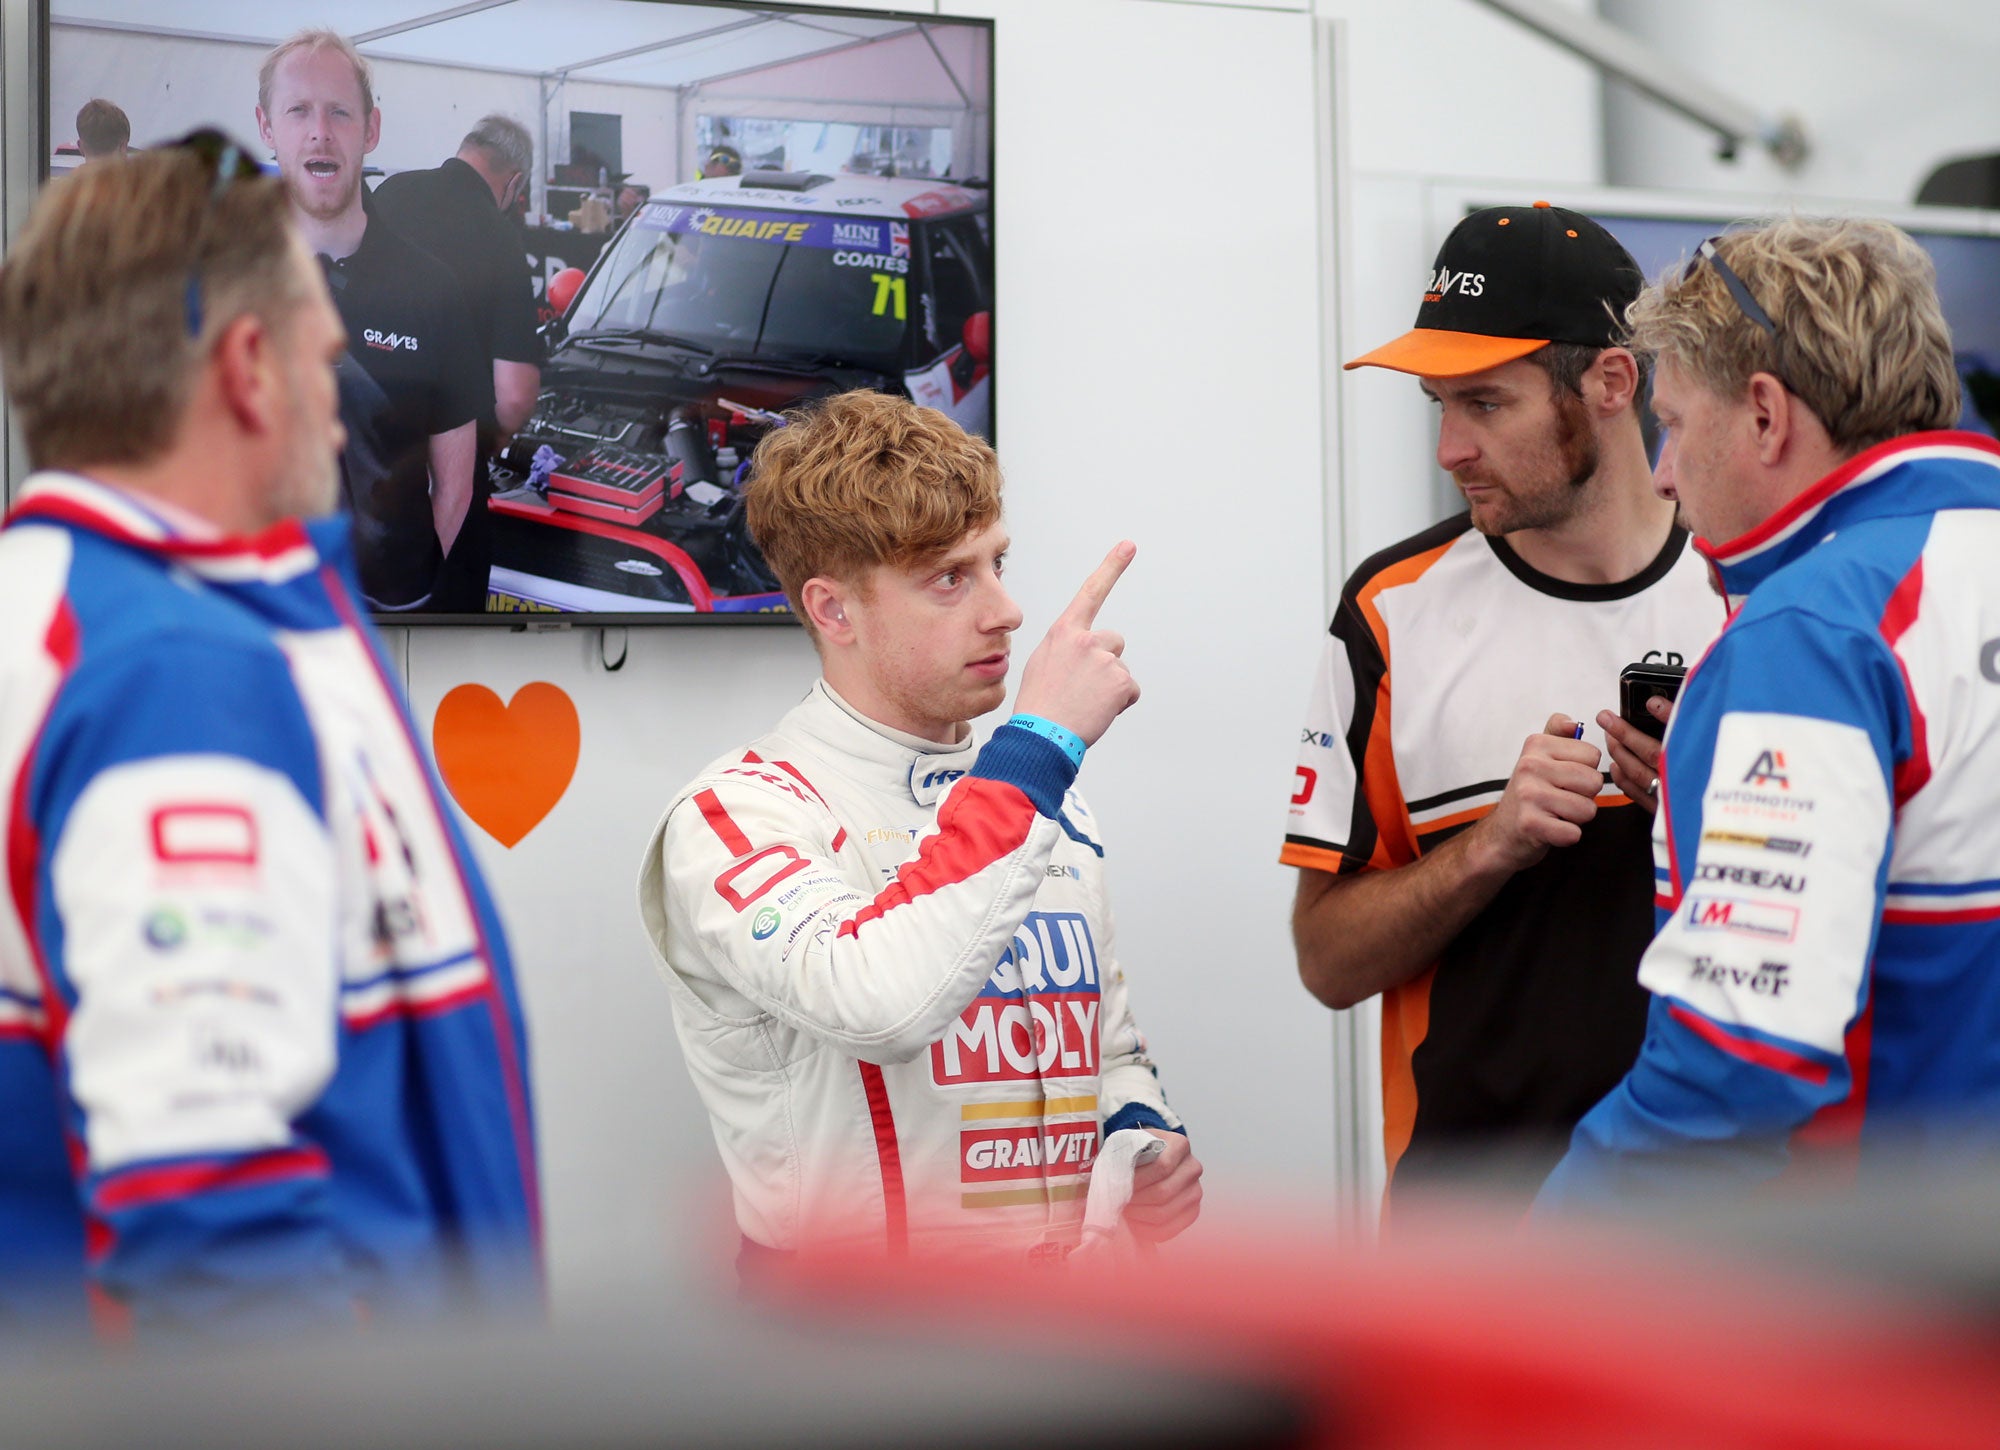 Bradley Gravett son of BTCC British Touring Car Champion Robb Gravett in the MINI Challenge JCW Series at Donington in 2021 Talking to Dave Robb Jeremy Graves Motorsport Cooper Racing Driver LIQUI MOLY LM Performance Thinking it Better